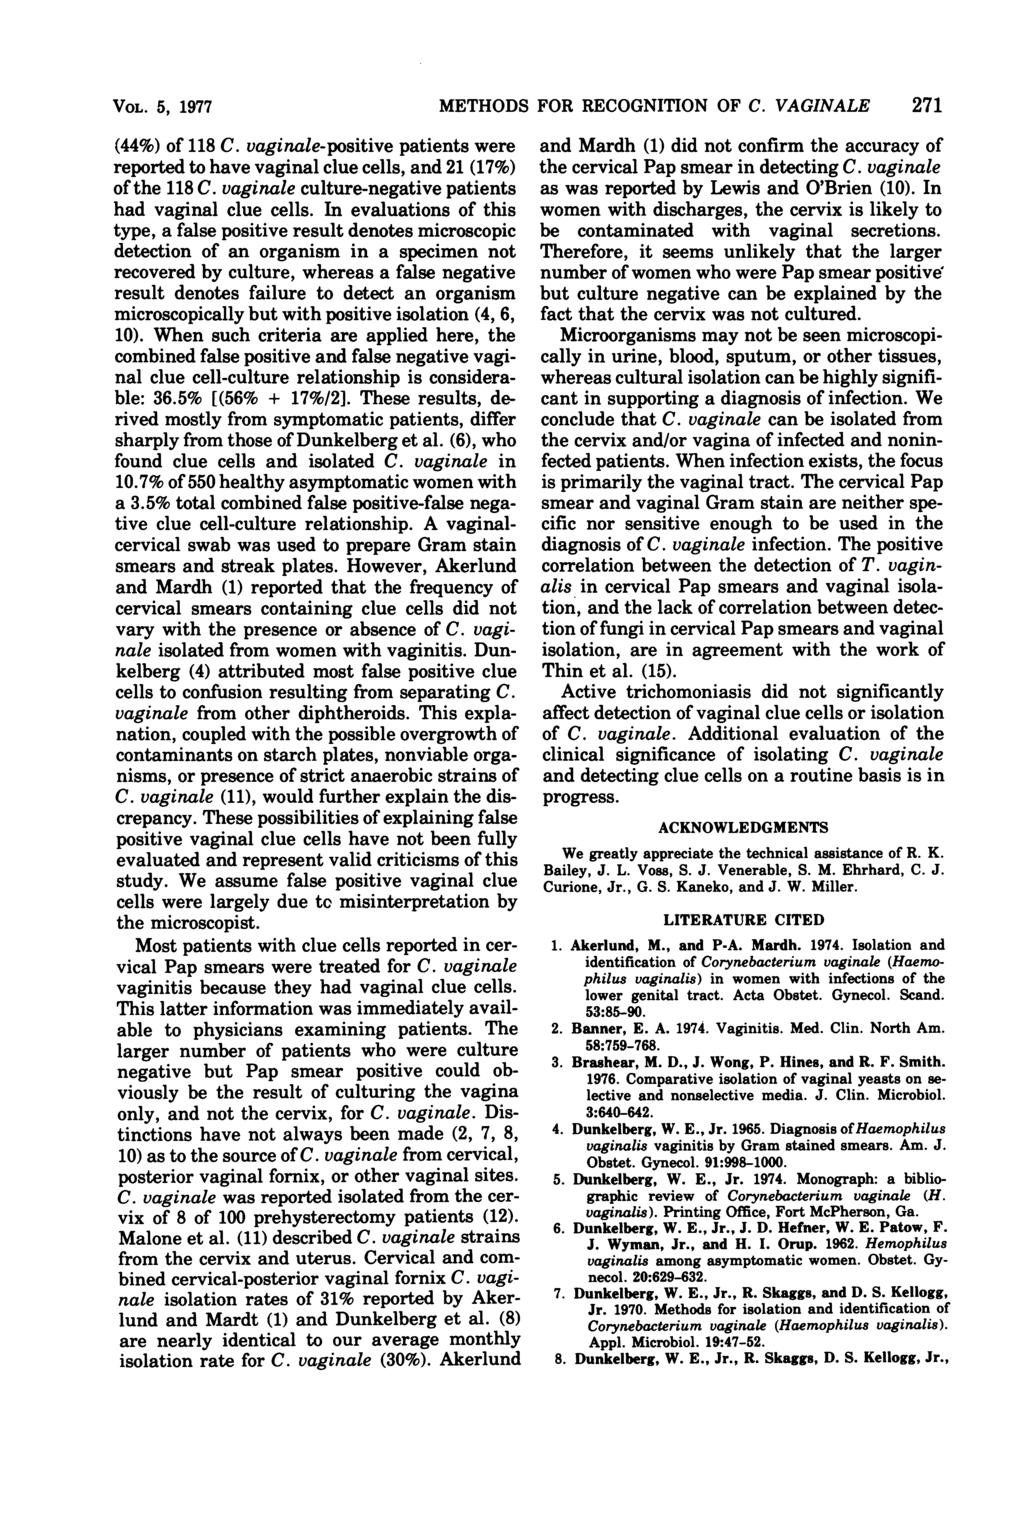 VOL. 5, 1977 METHODS FOR RECOGNITION OF C. VAGINALE 271 (44%) of 118 C. vaginale-positive patients were reported to have vaginal clue cells, and 21 (17%) of the 118 C.